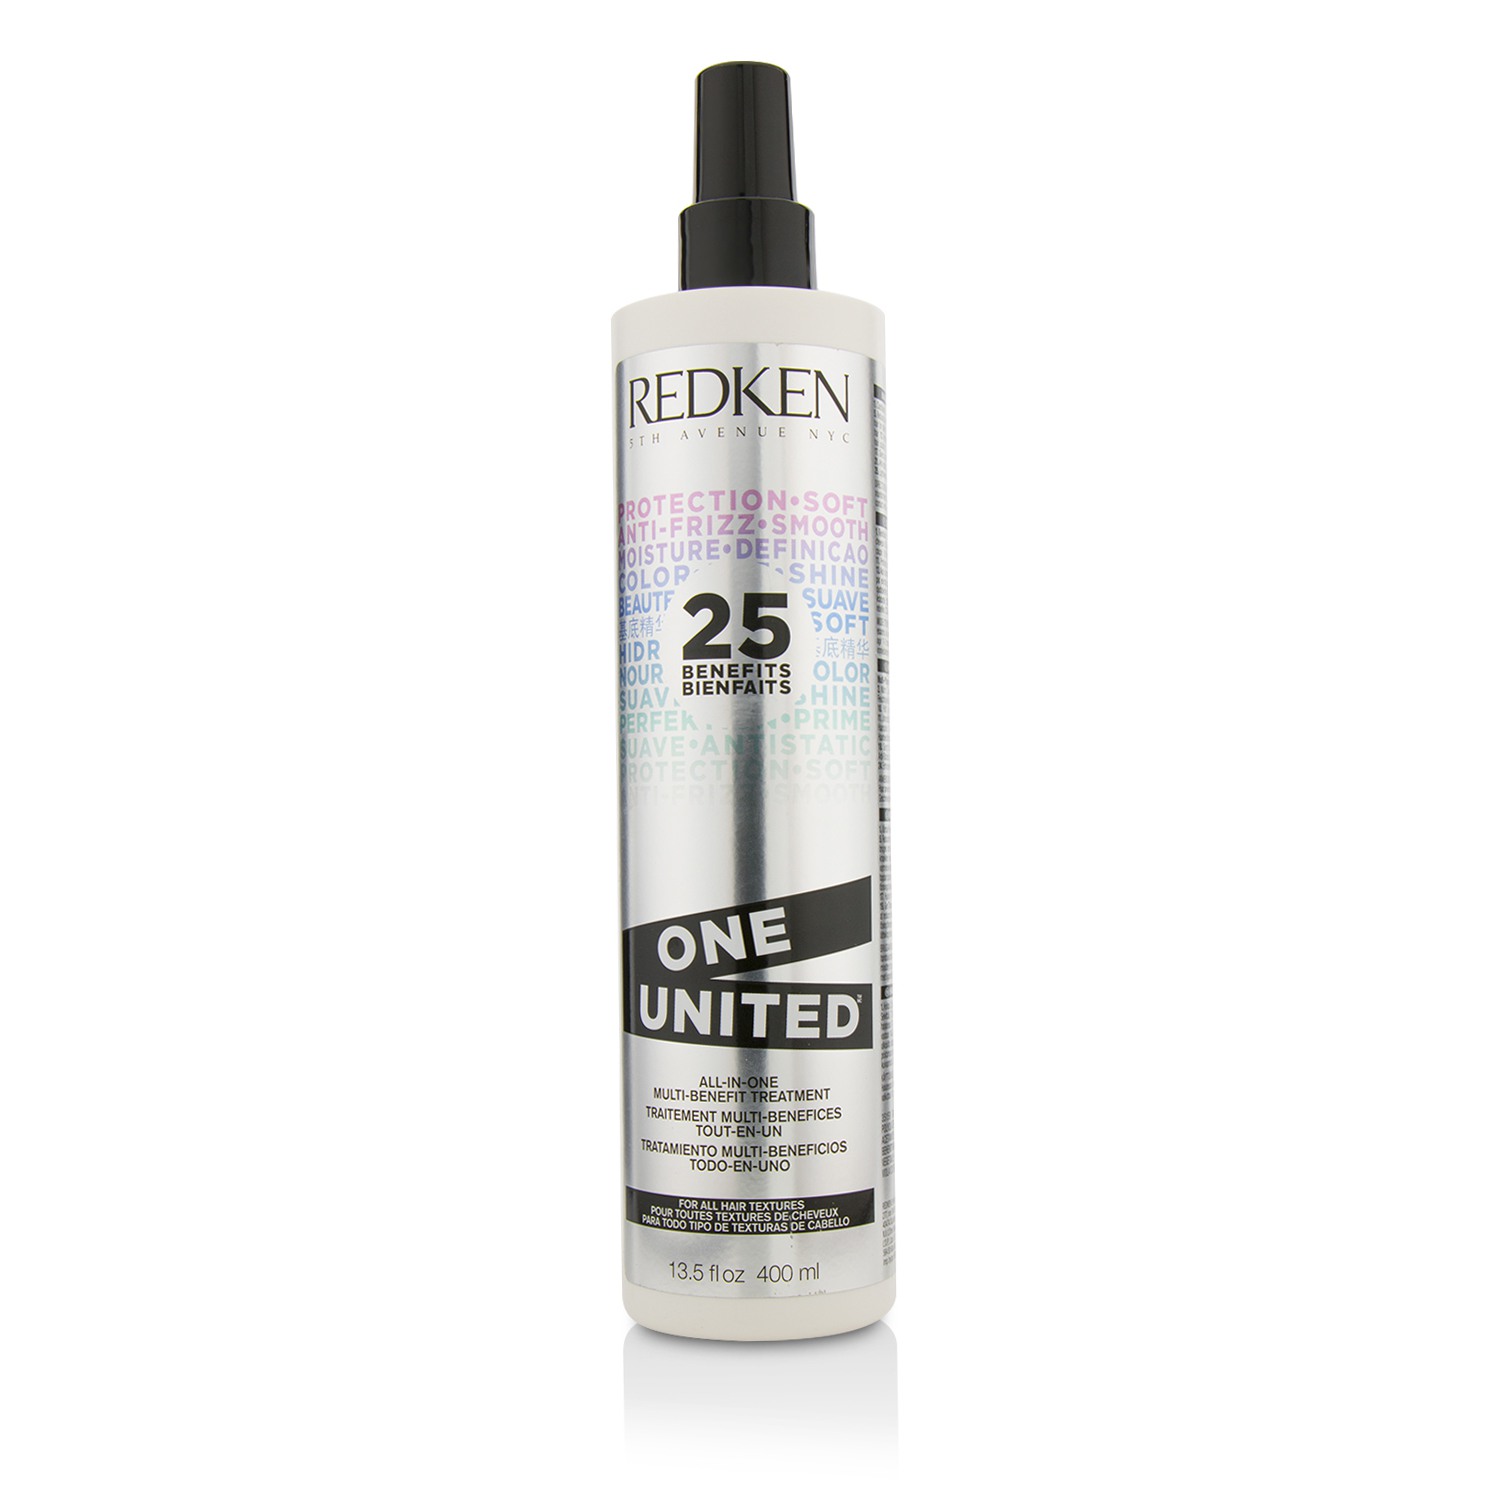 One United All-In-One Multi-Benefit Treatment (For All Hair Textures) Redken Image